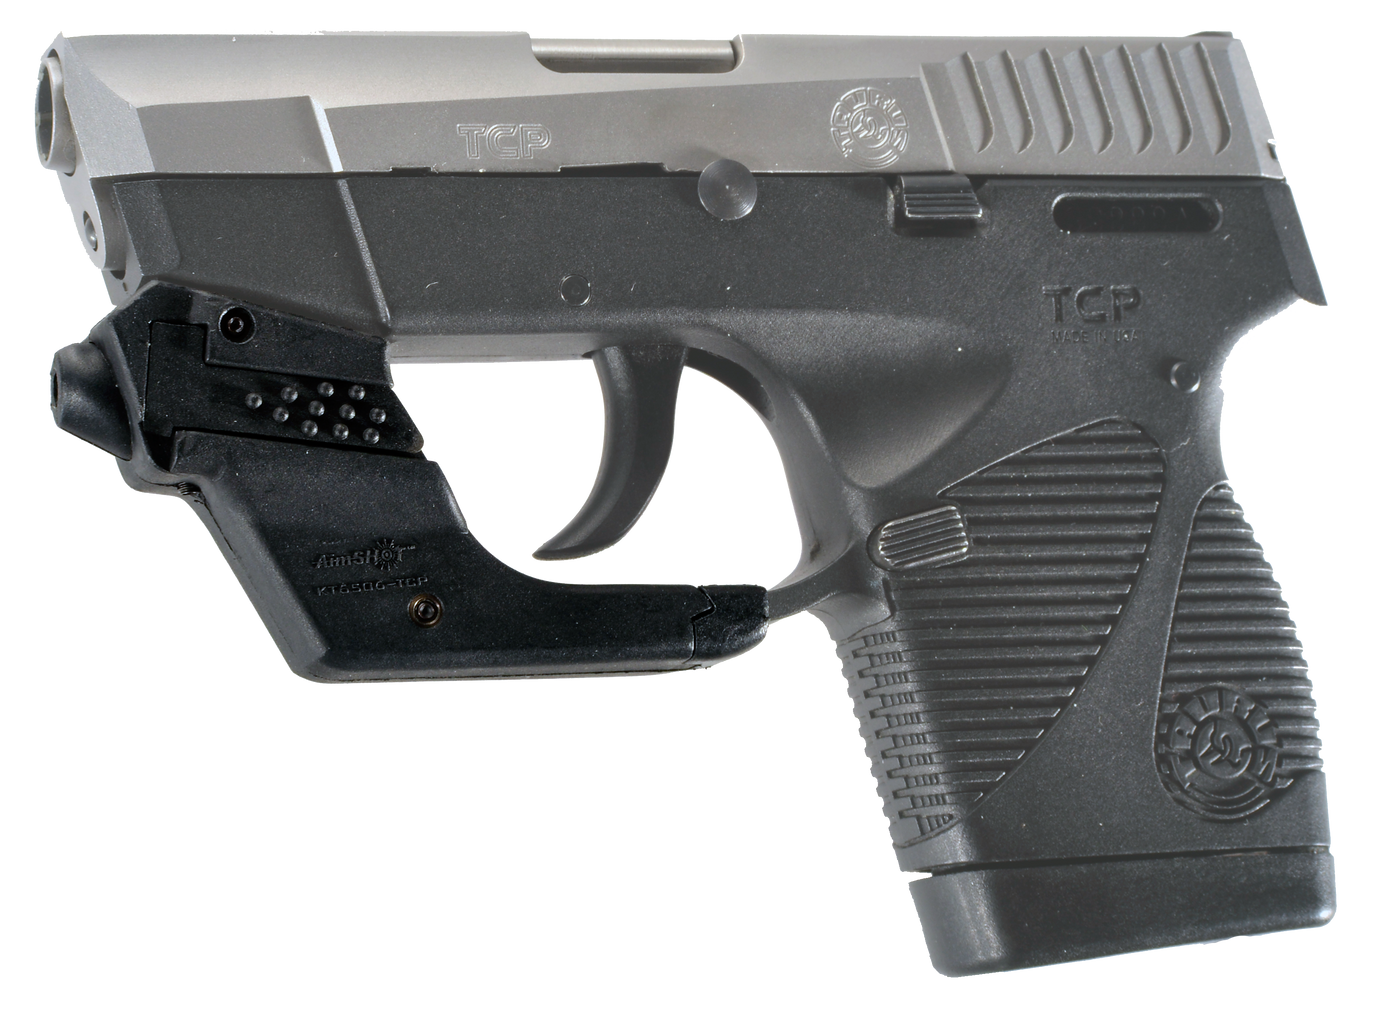 Aimshot Conceal Carry, Aims Kt6506tcp     Red Laser Tau Tcp/738